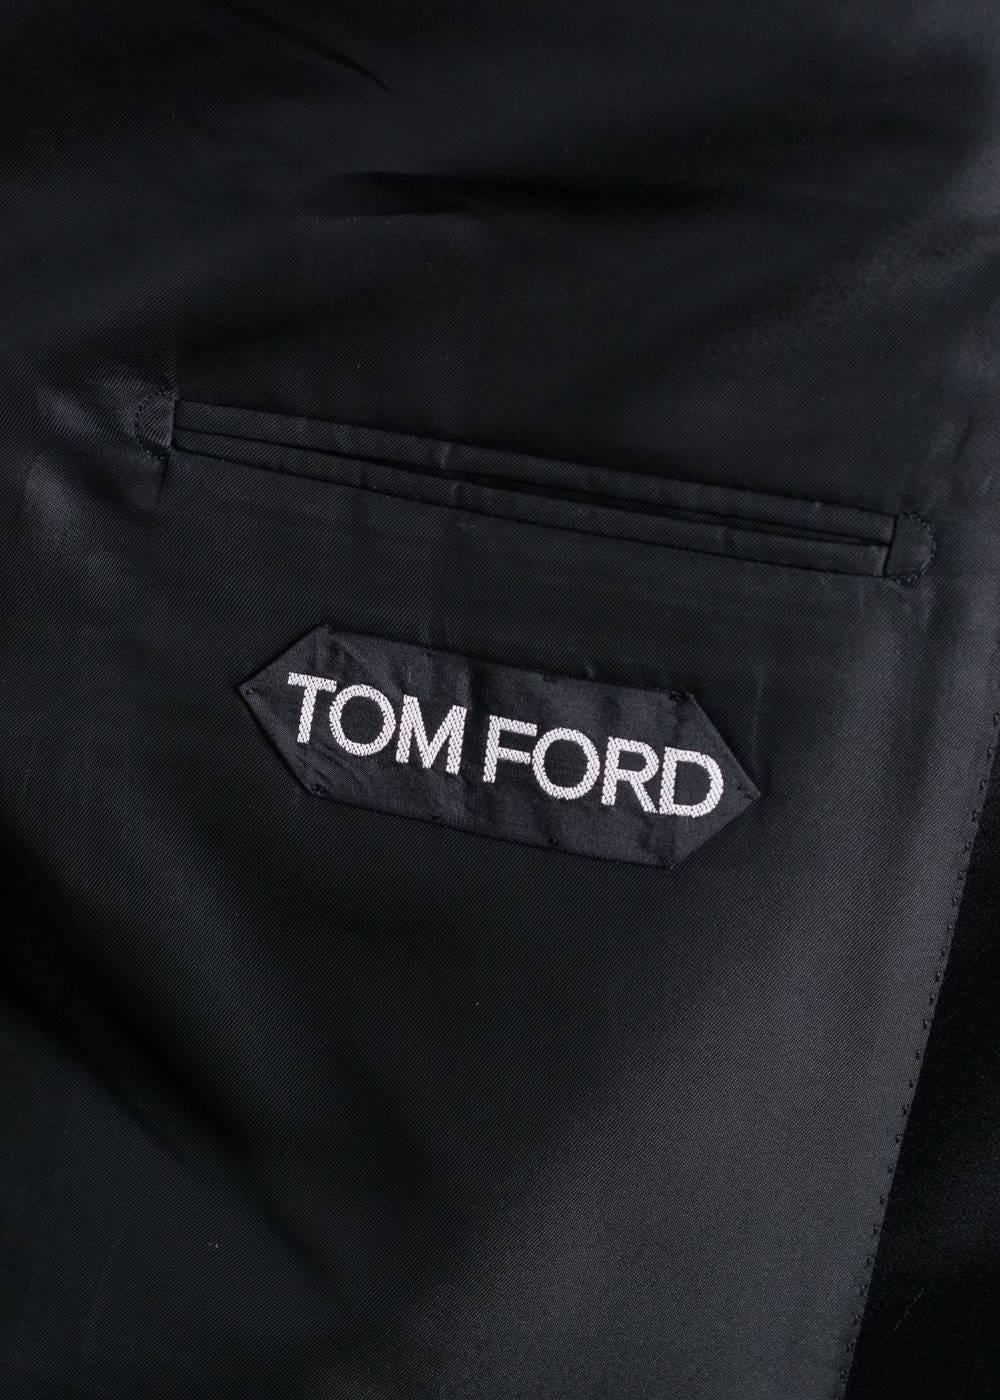 Brand New Tom Ford Windsor Tuxedo
Original Tags & Hanger Included
Retails In-Stores & Online for $5470
IT 58R / US 48 

A classic tuxedo, Tom Ford's 'Windsor' Base Tuxedo is crafted from a luxury twill fabric in rich black. This tuxedo boasts a